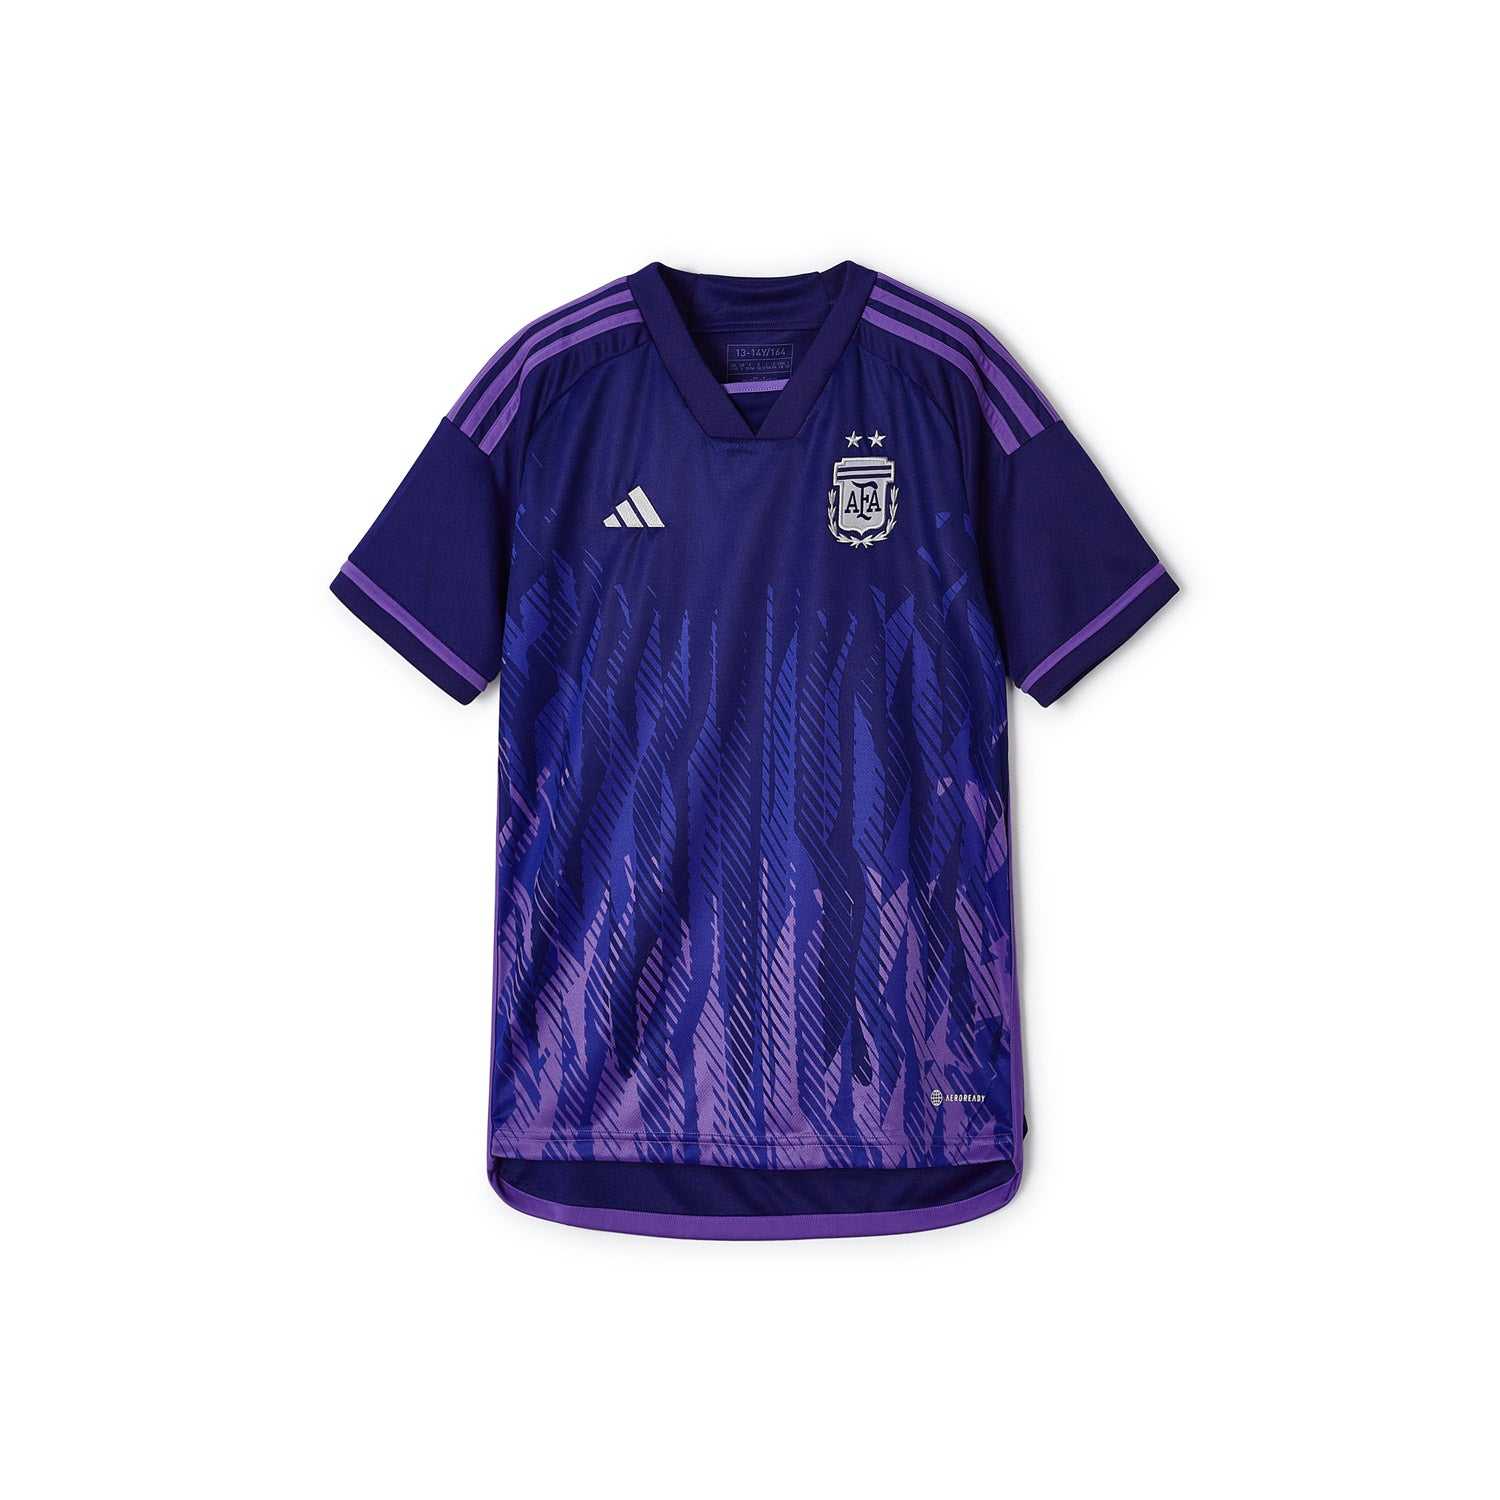 Argentina 22 Away Jersey - Youth